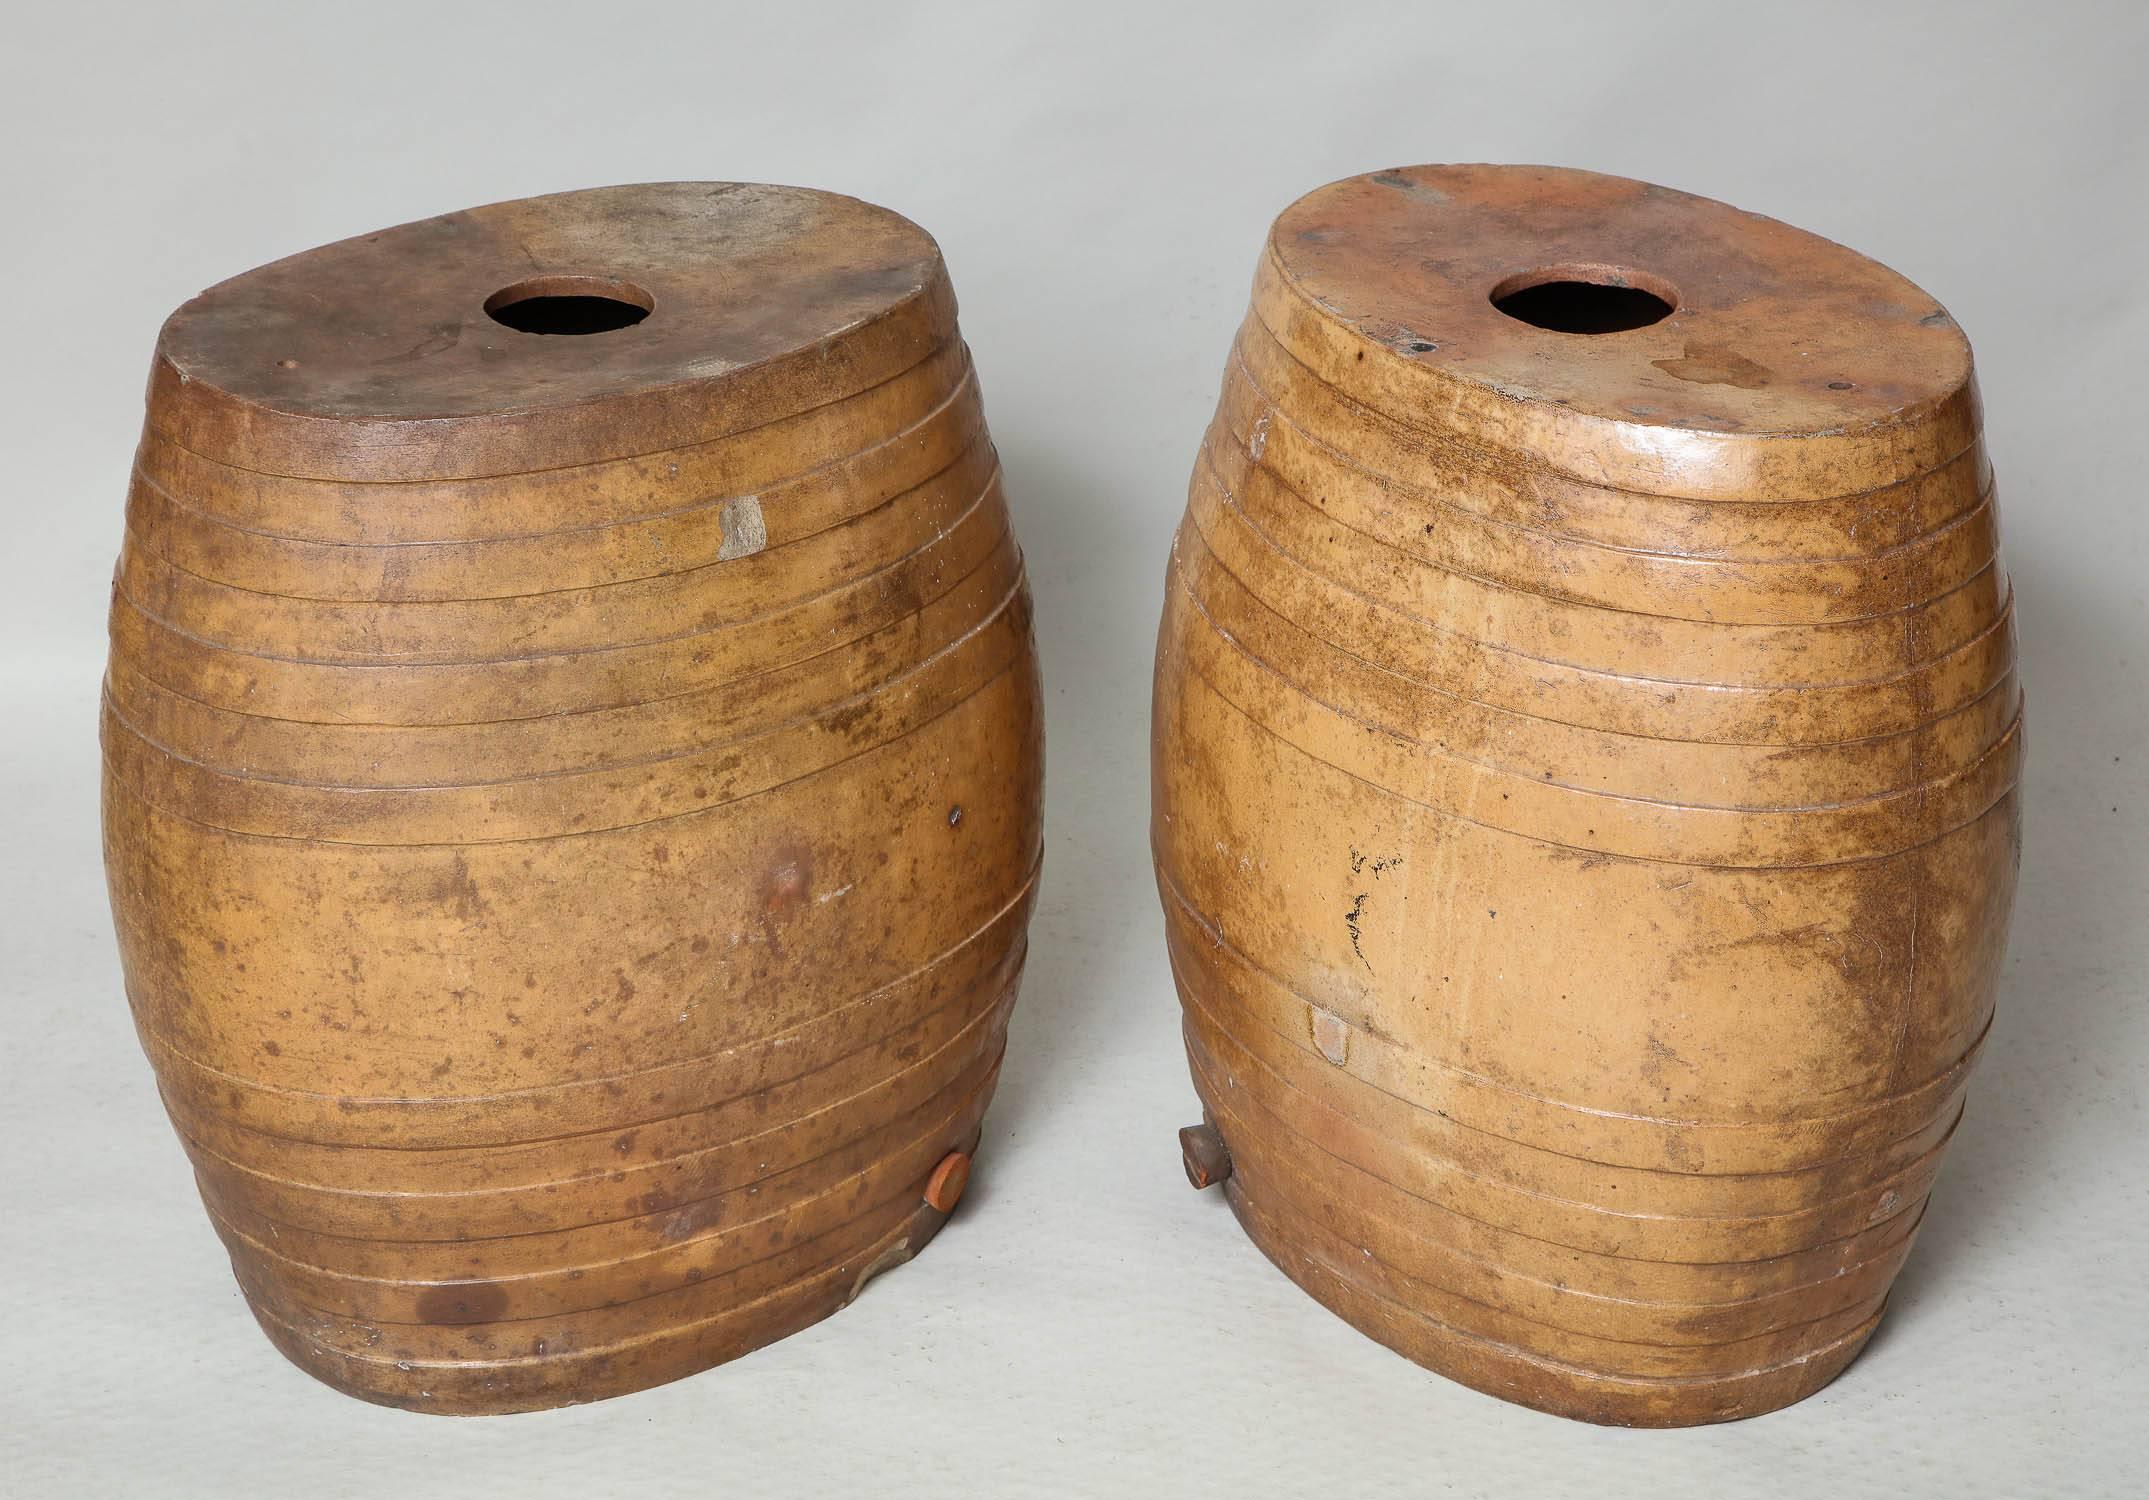 Unusual pair of glazed pottery water barrels by H.B. Williams Ferrys Pottery, Lambeth, London, which work well as side tables or garden stools.